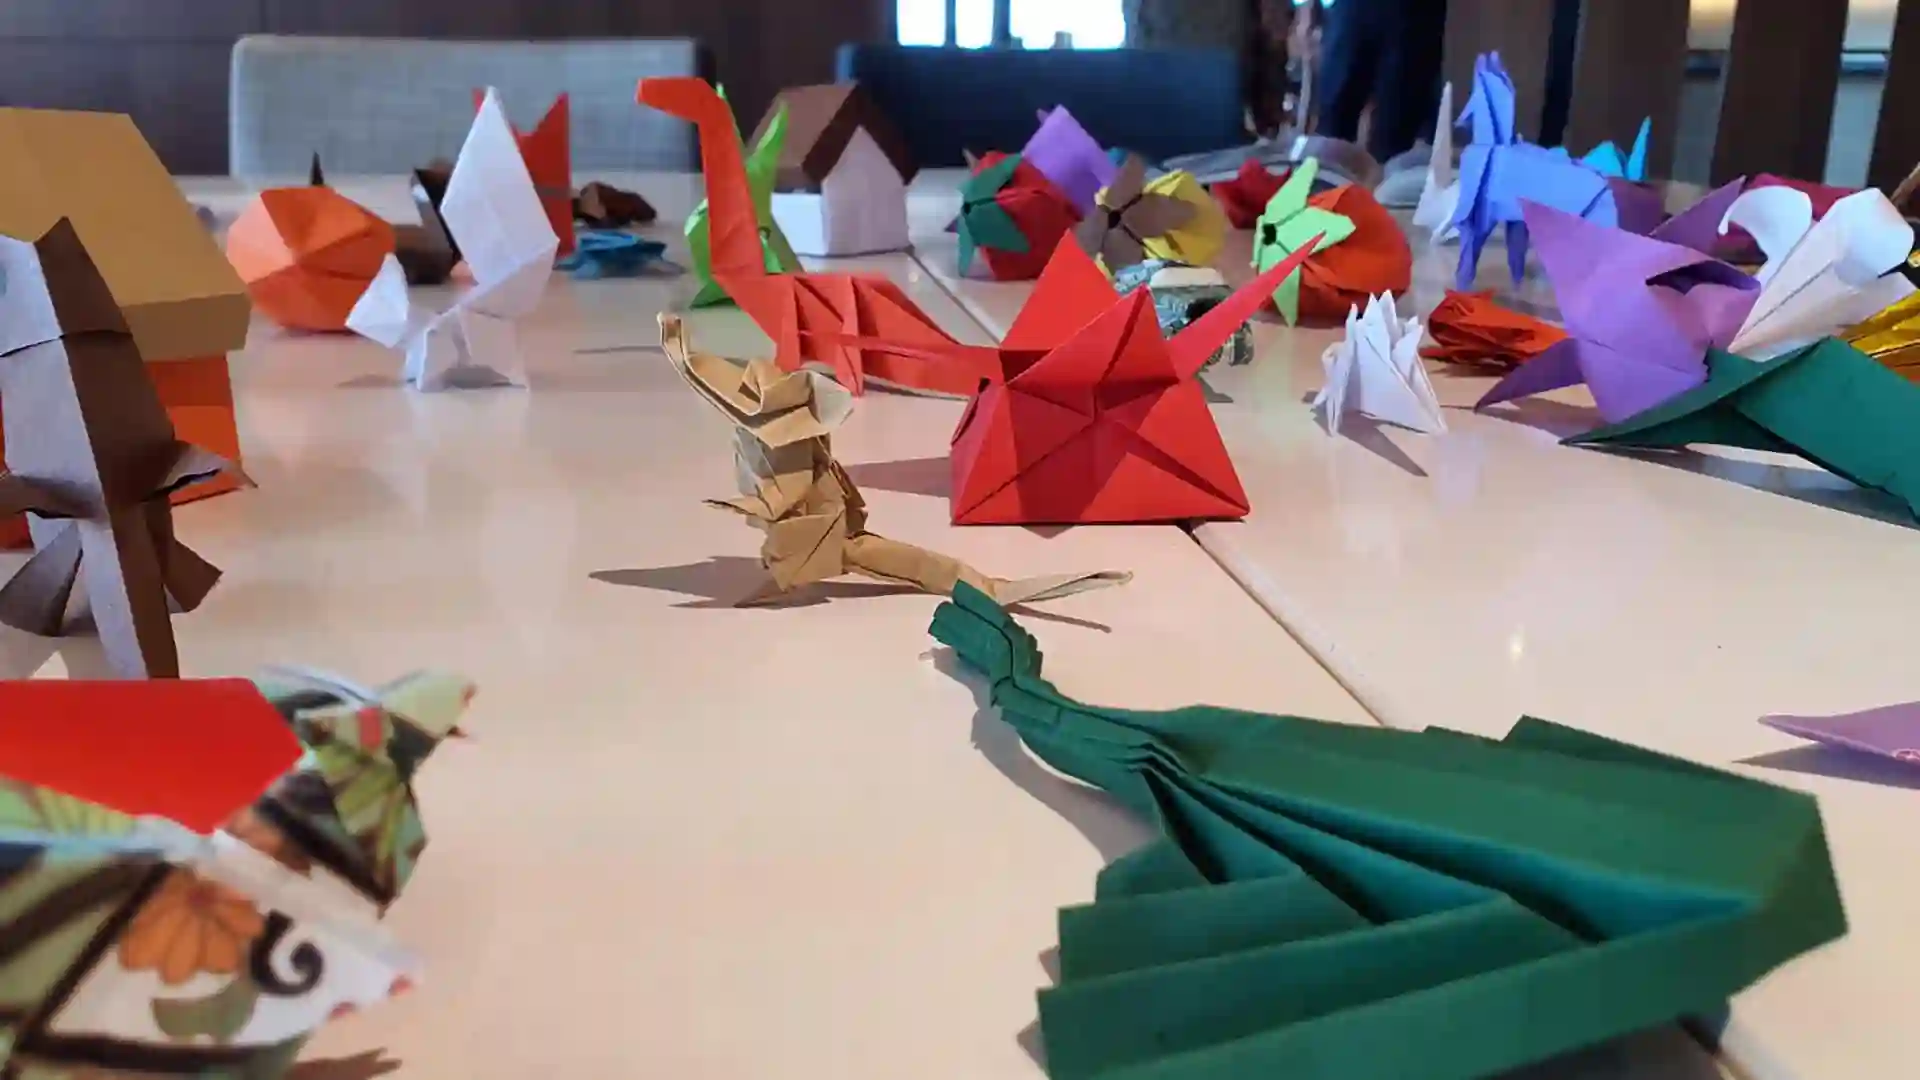 White table covered with colorful paper origami creatures and designs.